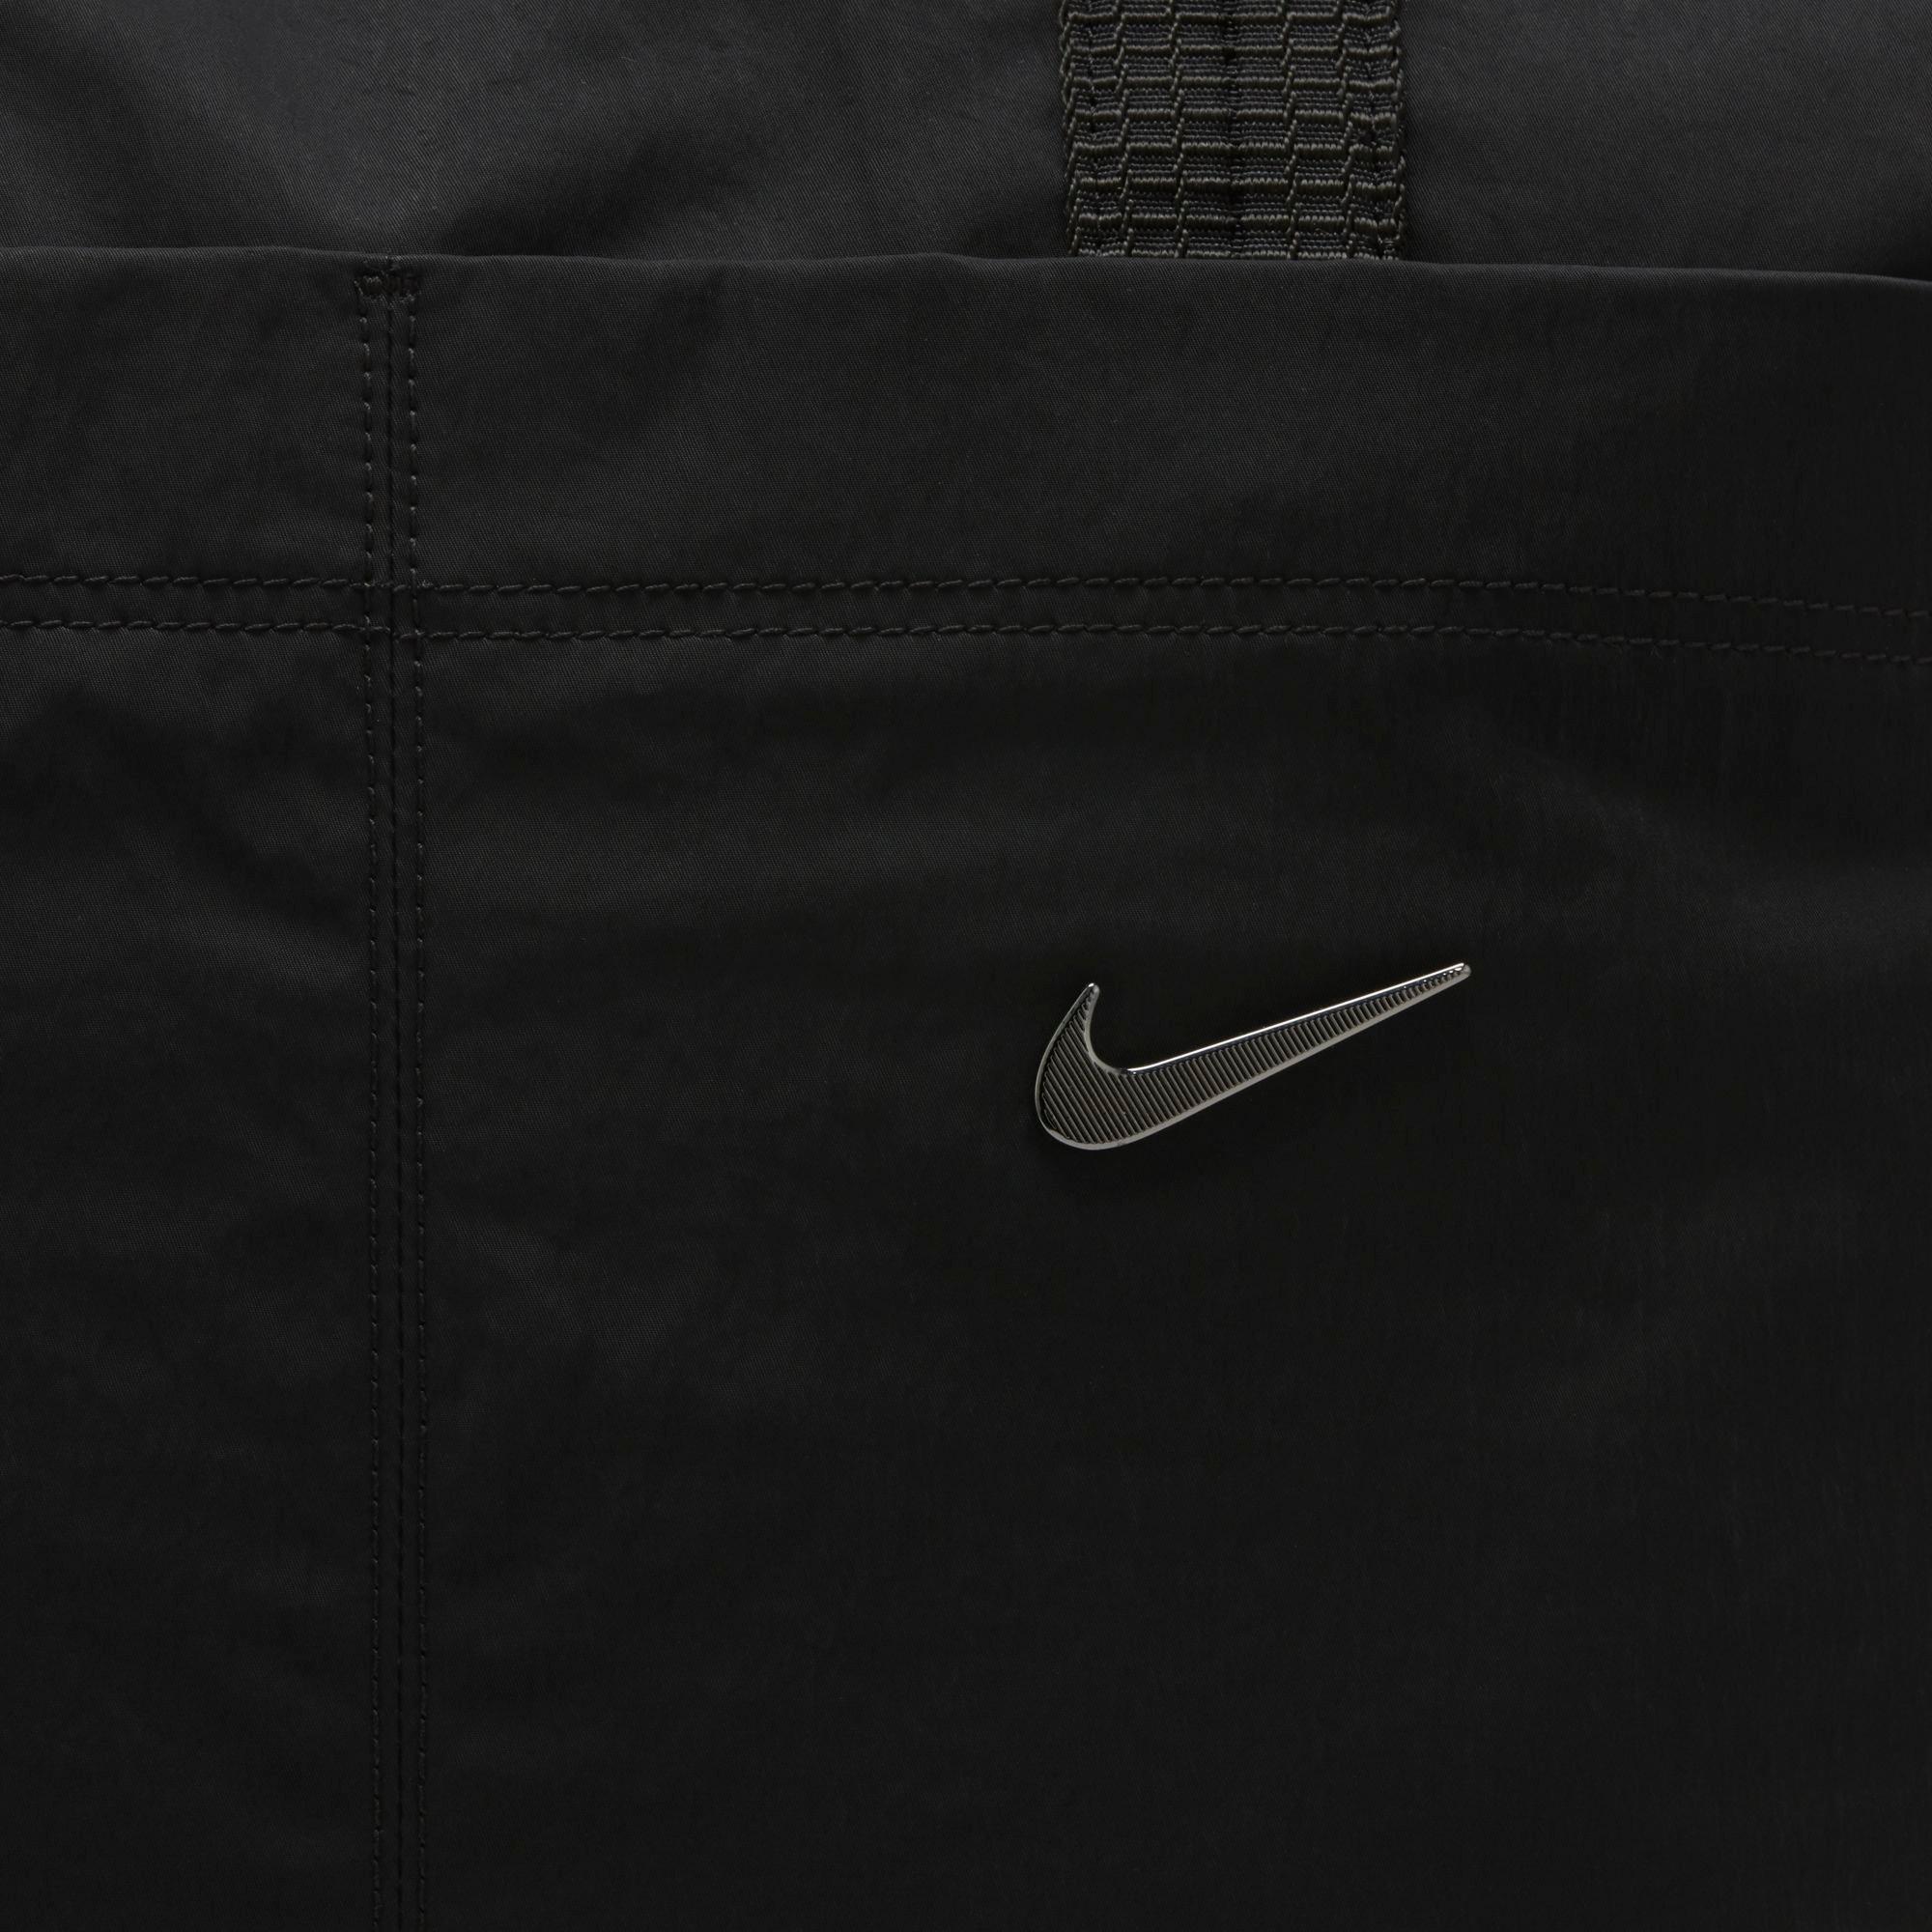 Nike w one luxe tote, bags, Leisure